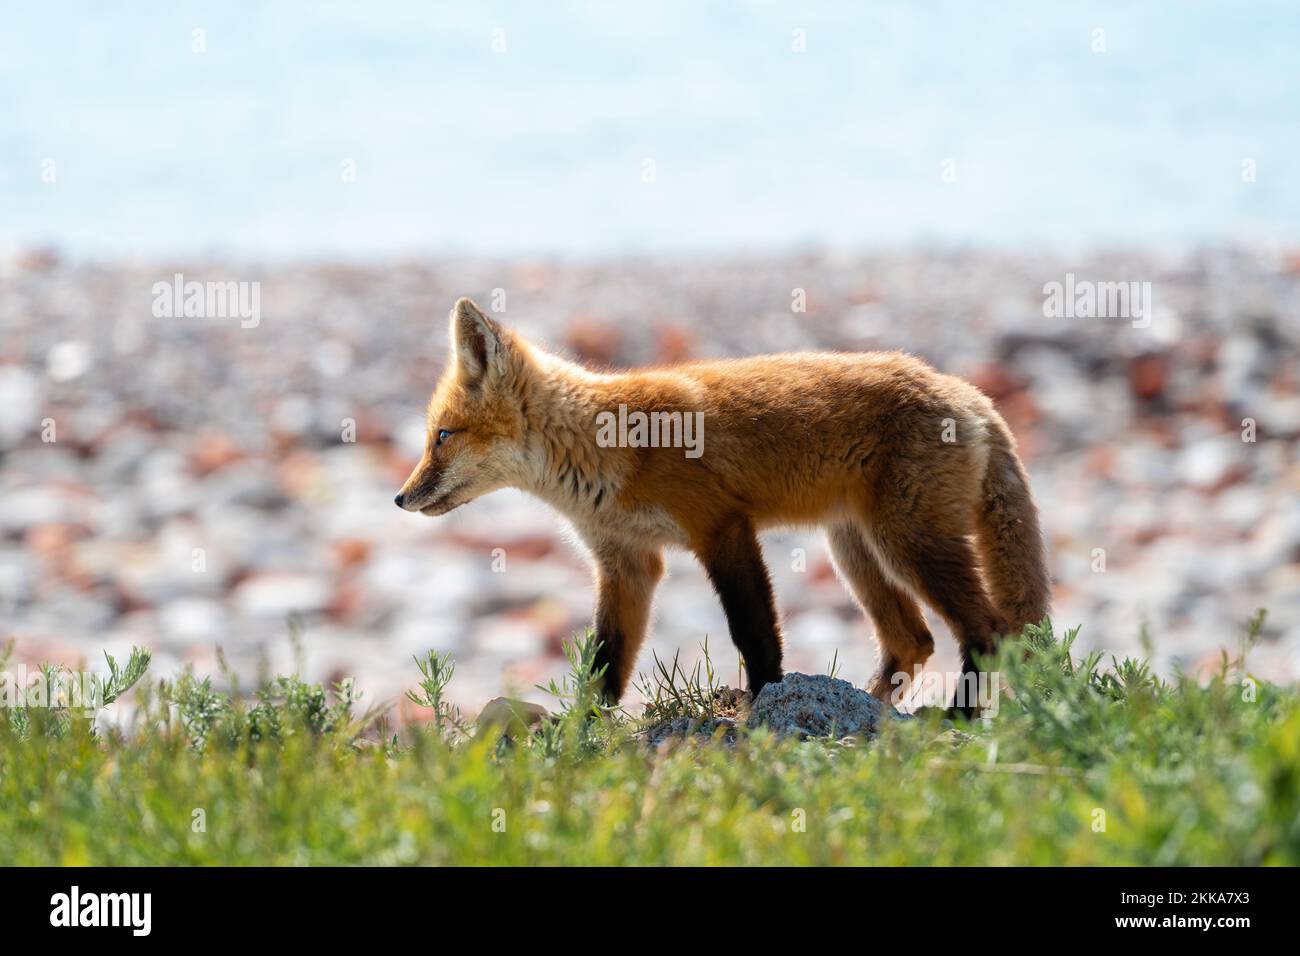 A young fox walks across a patch of grass Stock Photo